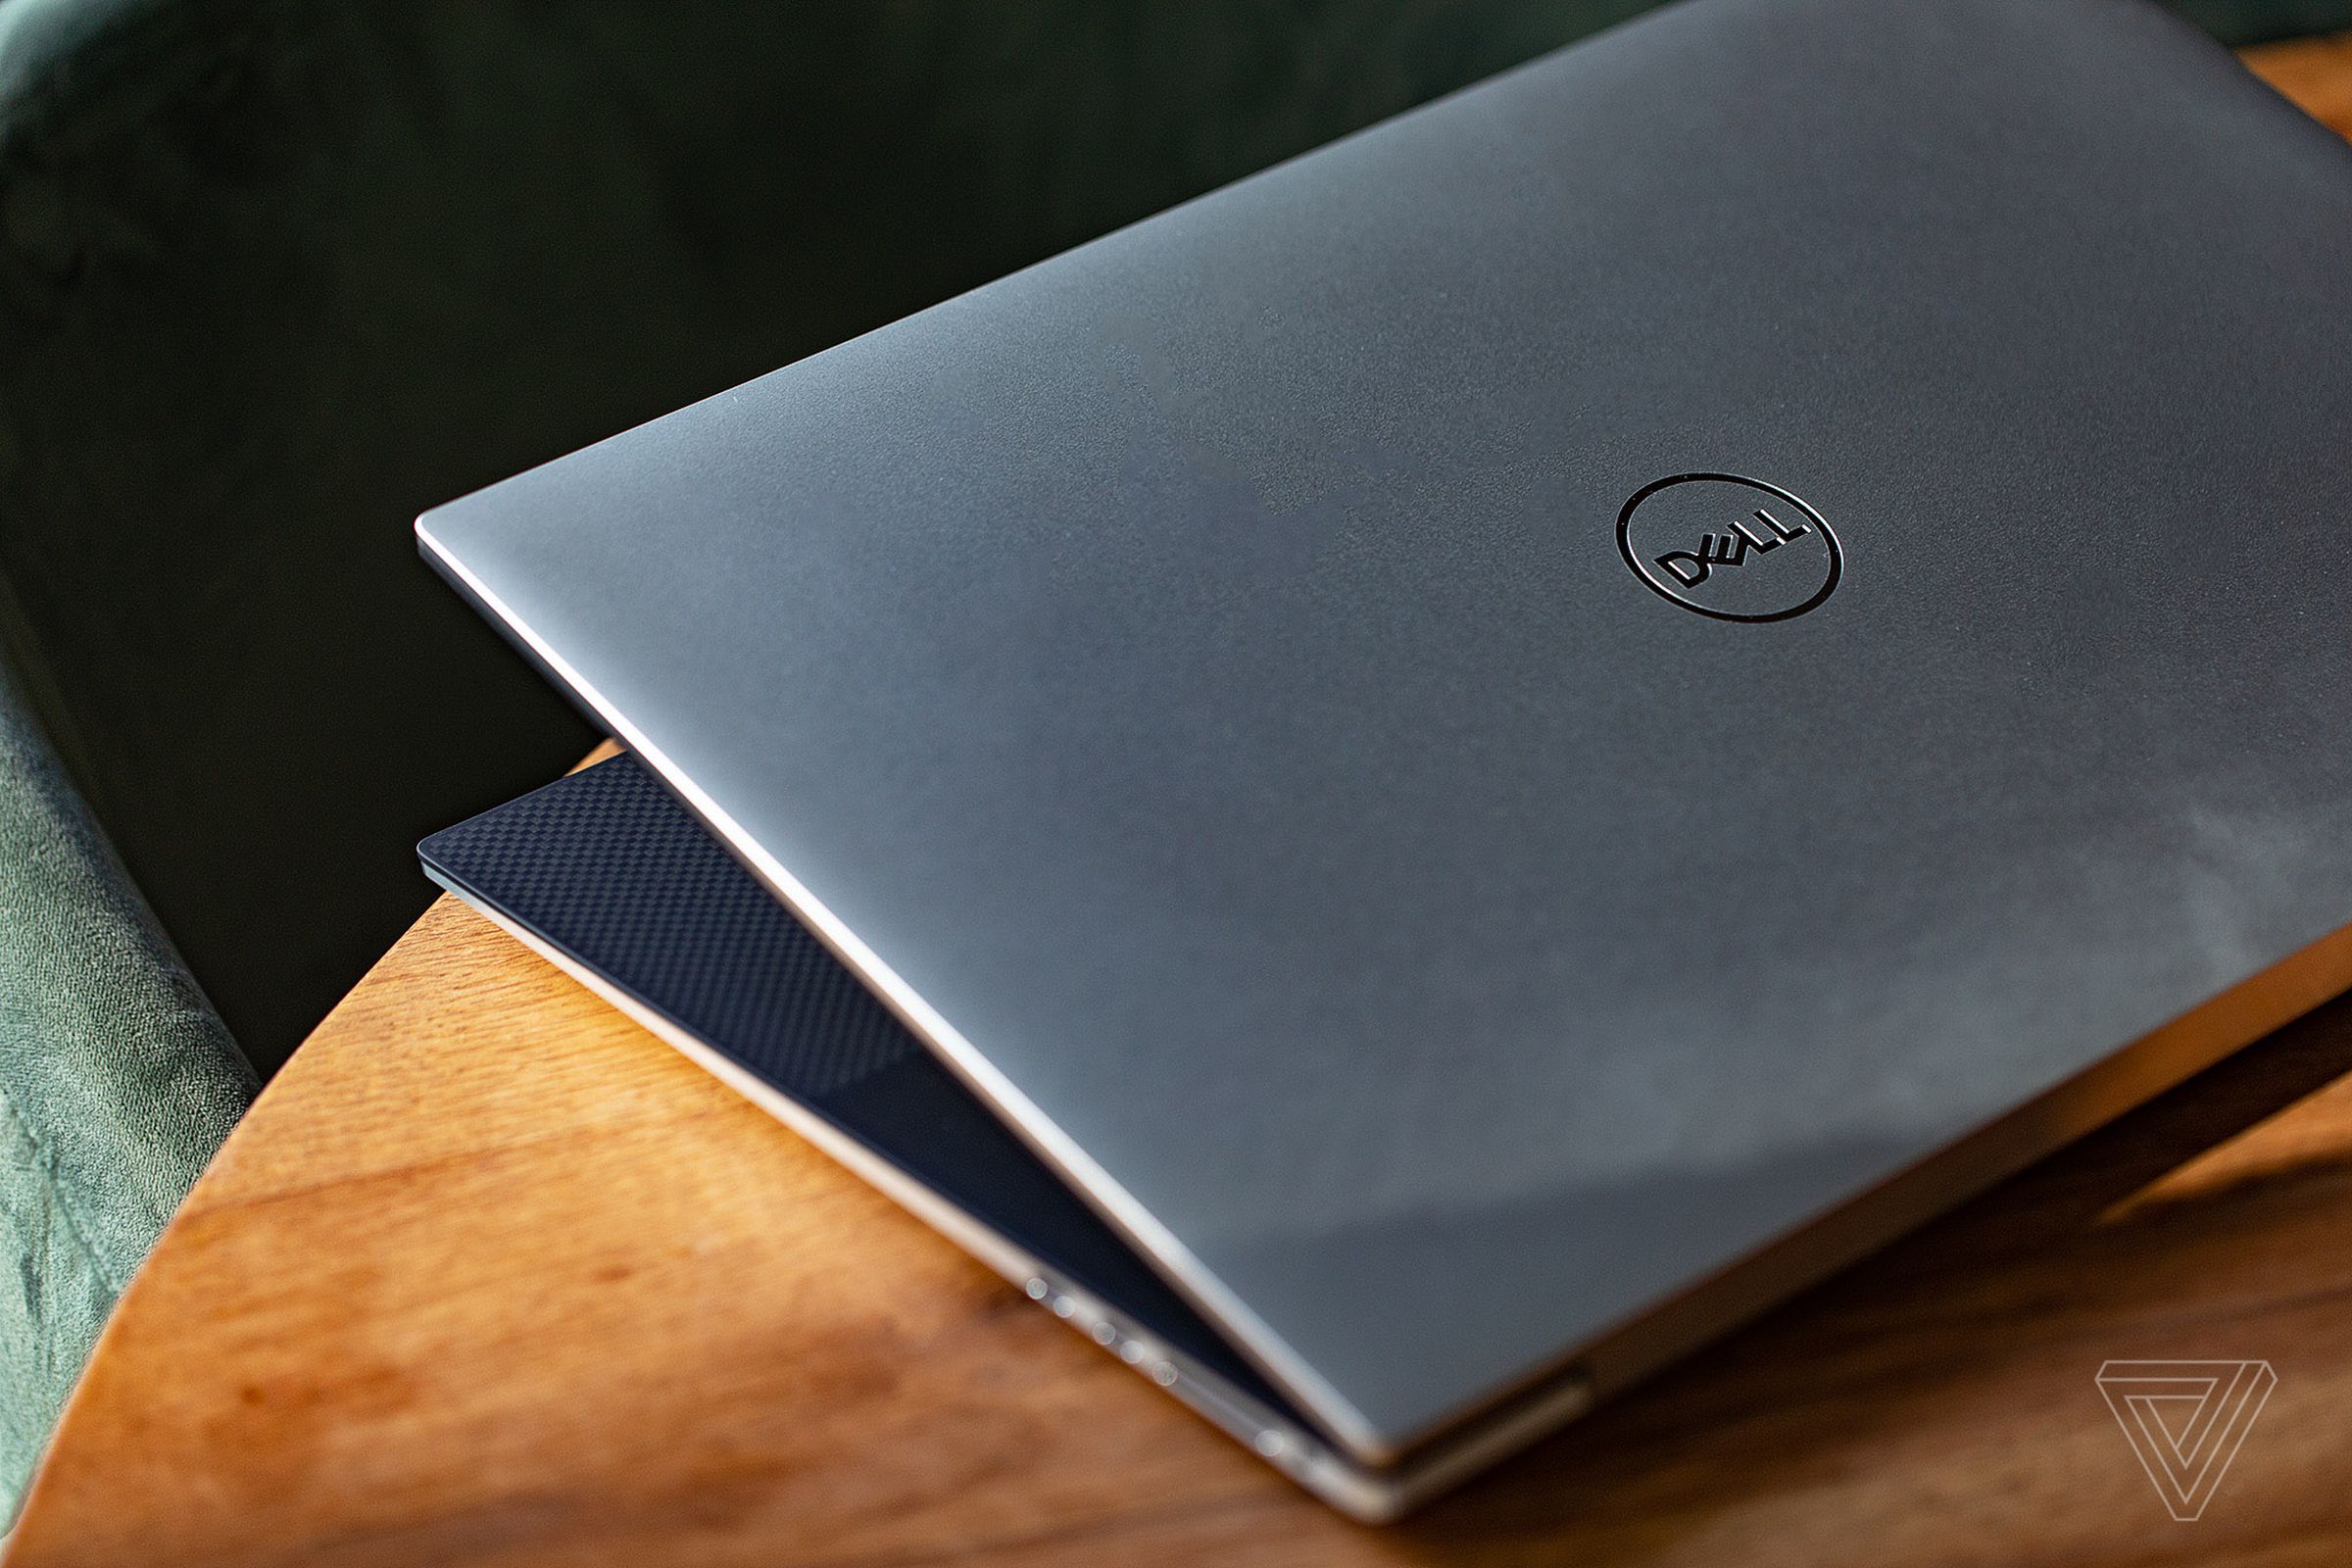 The top aluminum lid of the Dell XPS 17